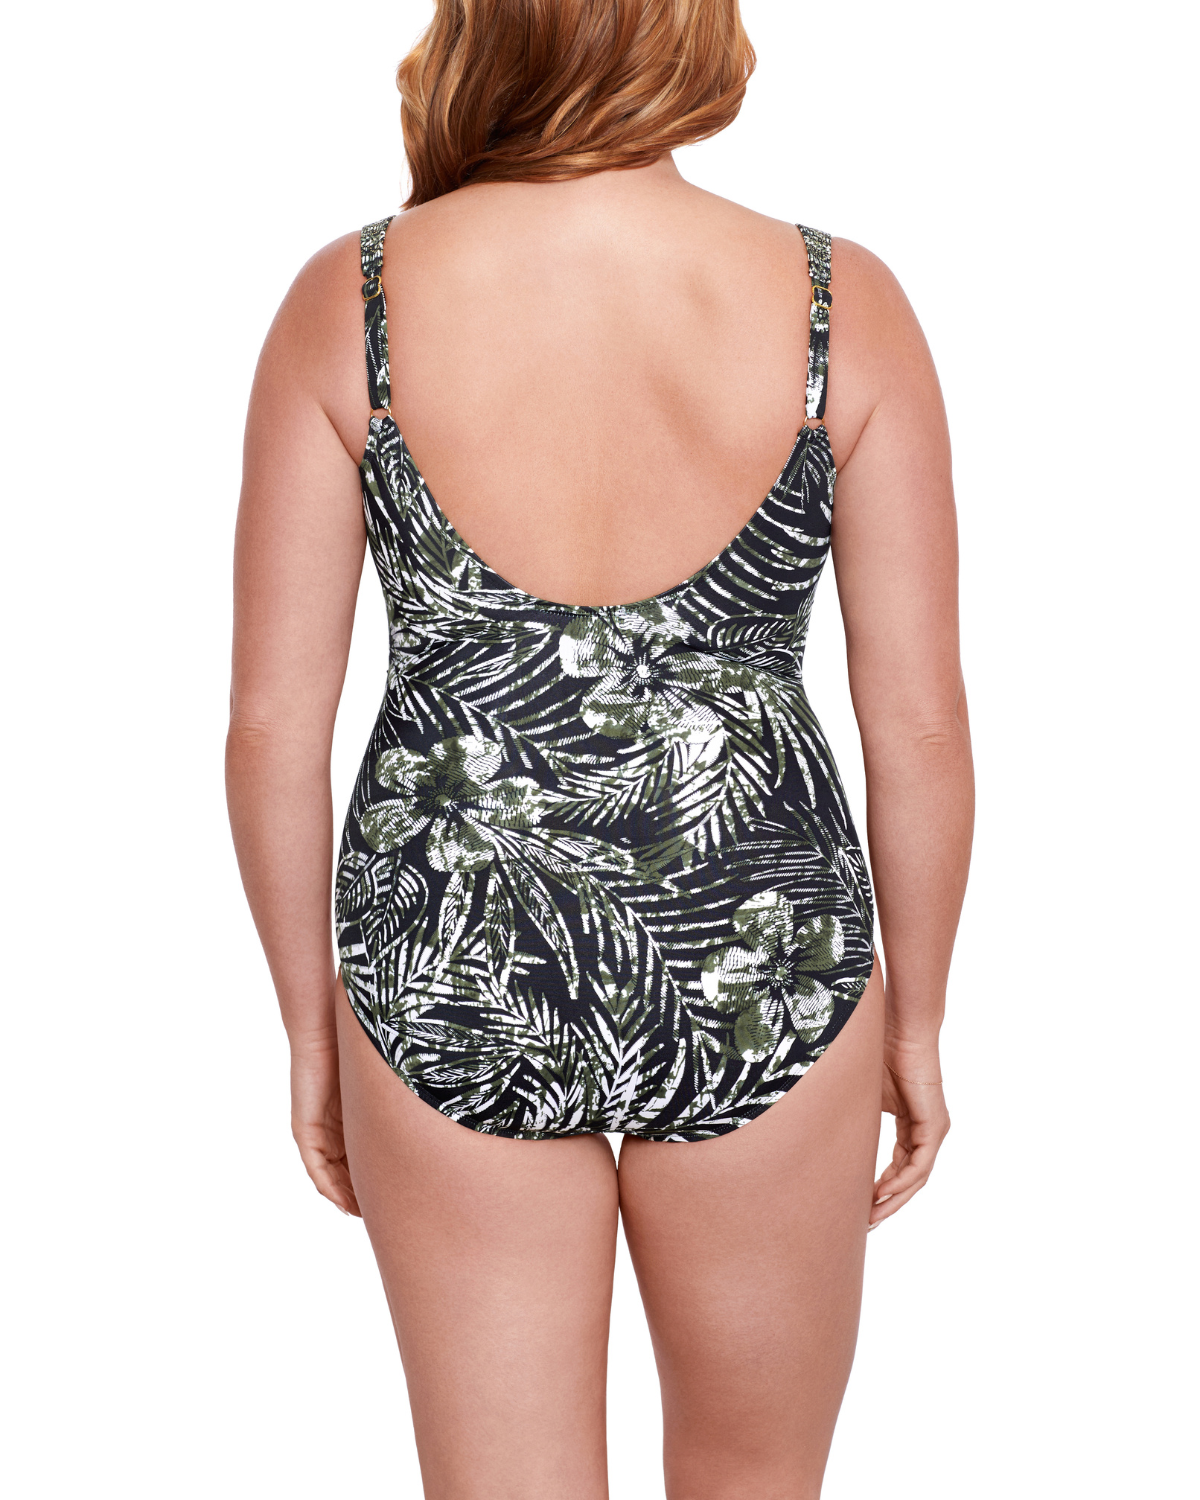 Model wearing a one piece swimsuit with hidden underwire in a black and white abstract floral print